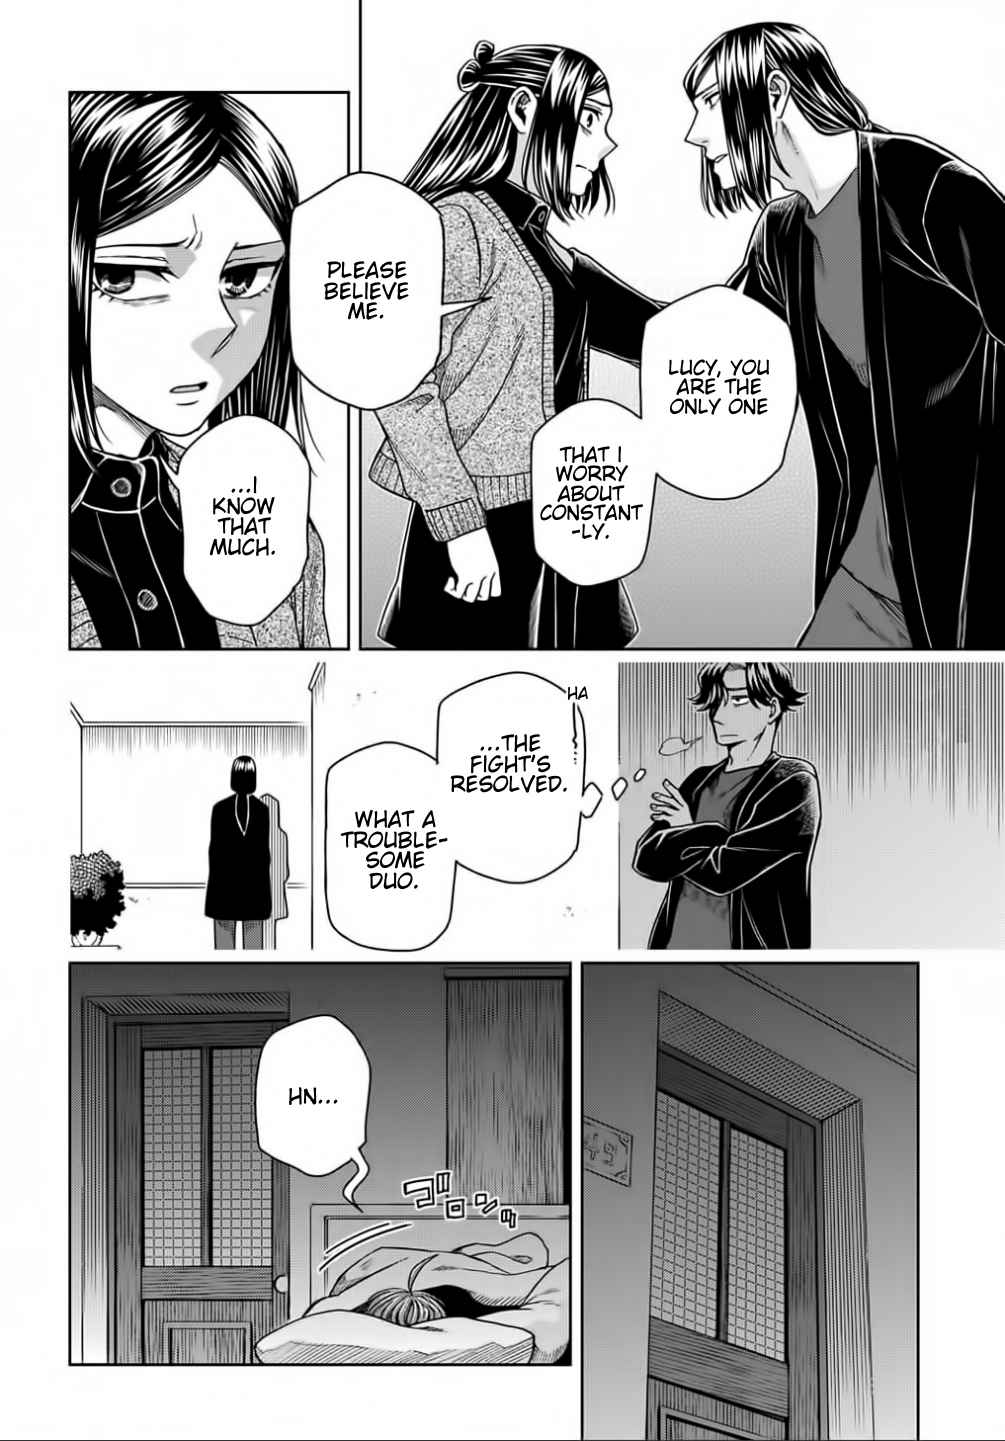 The Ancient Magus' Bride Vol. 14 Ch. 70 A small leak will sink a great ship. V